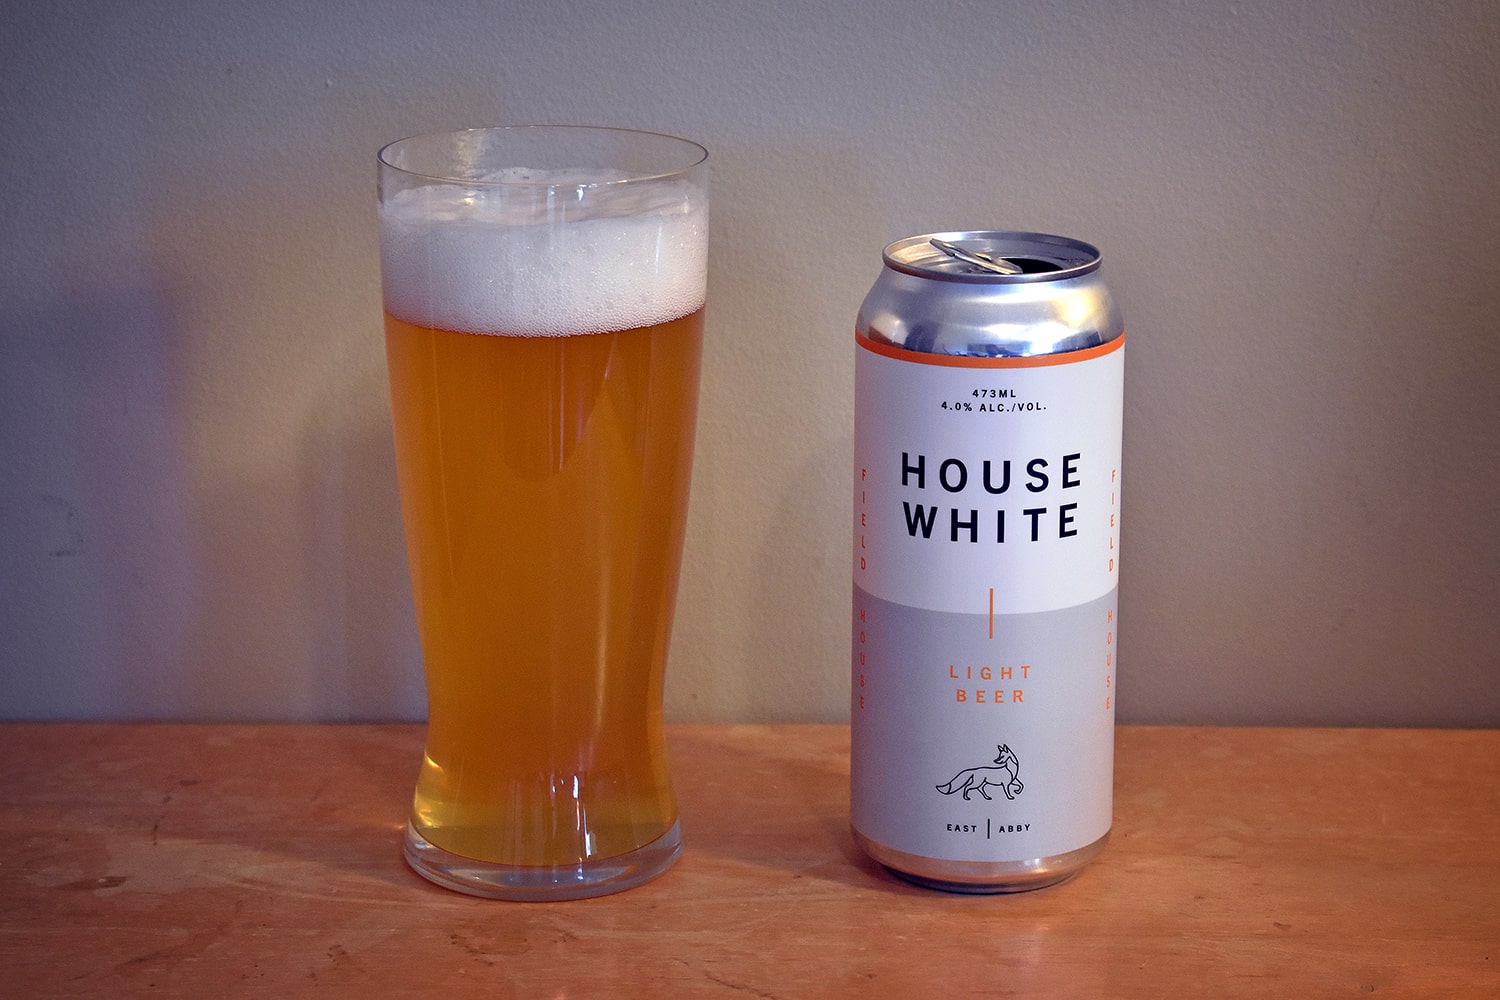 House White by Field House Brewing